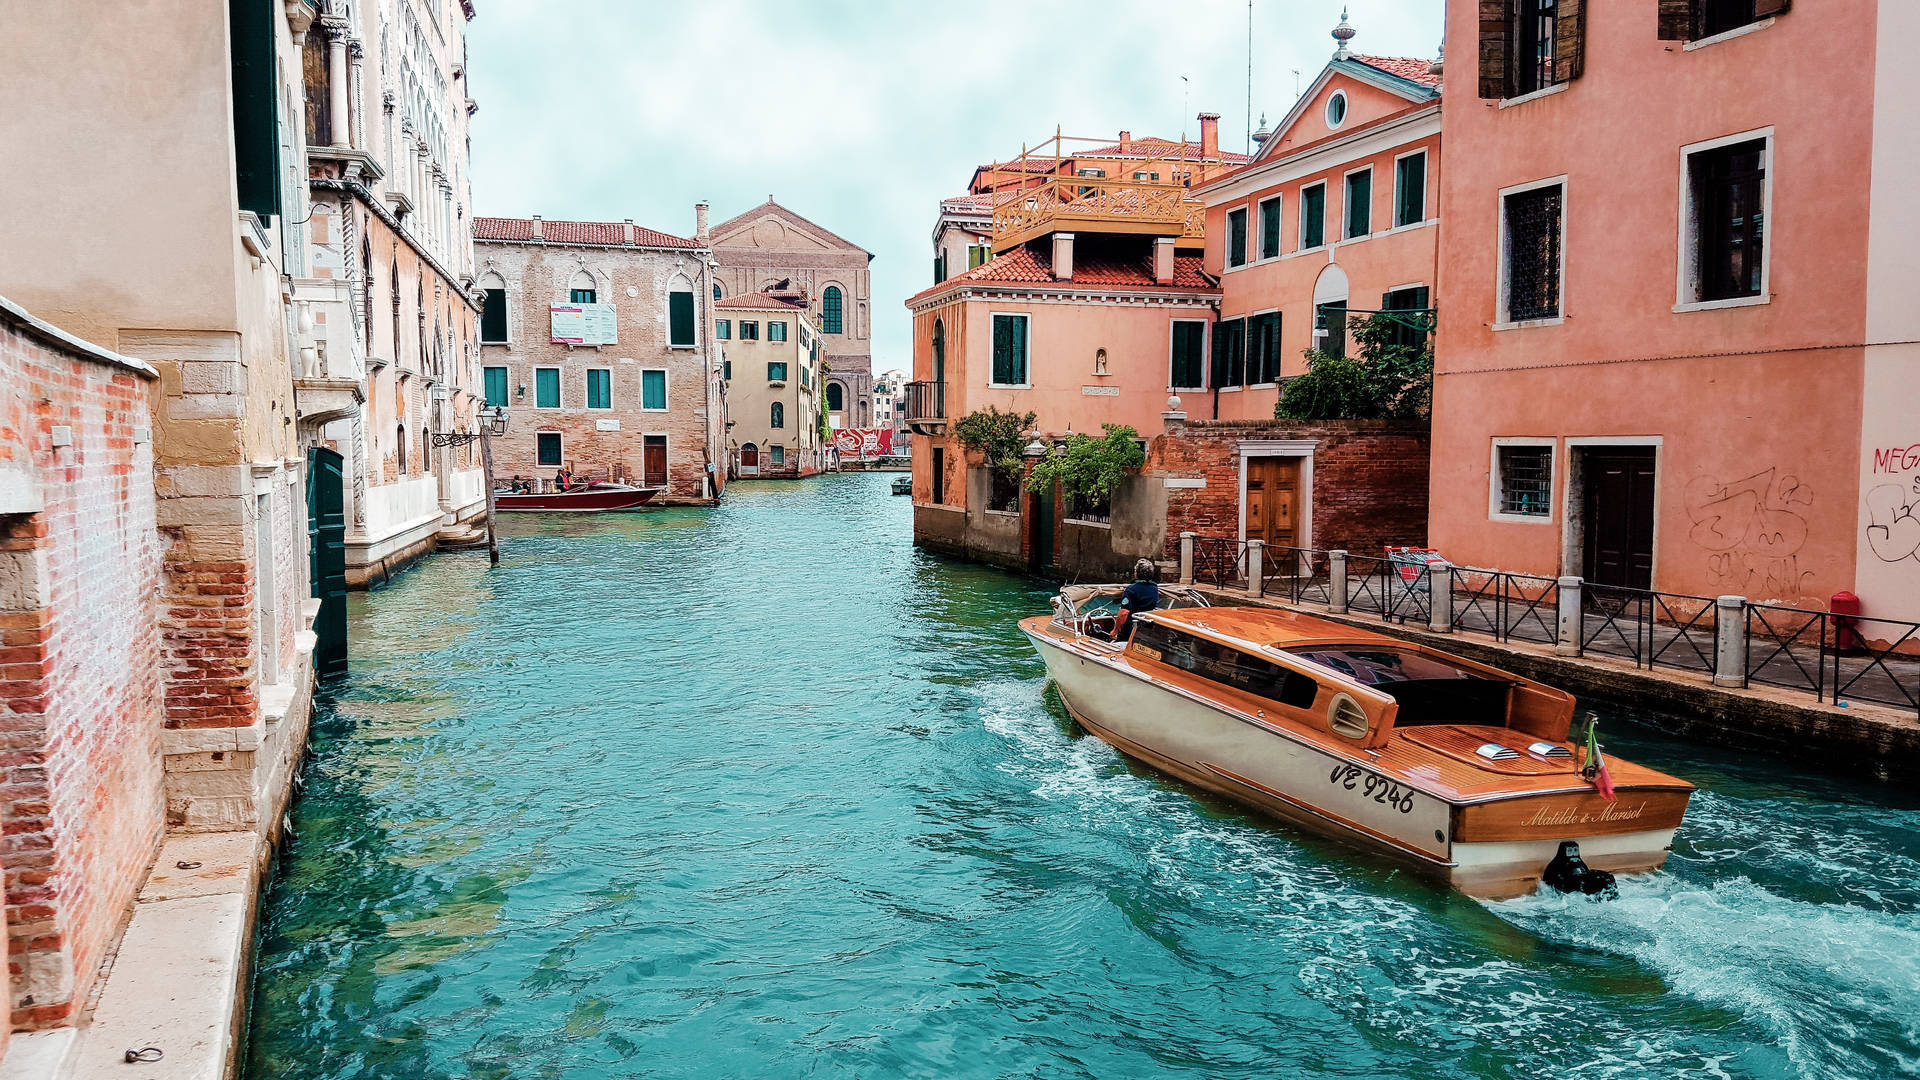 Semestervenedig Kanal (note: This Is A Direct Translation Of 